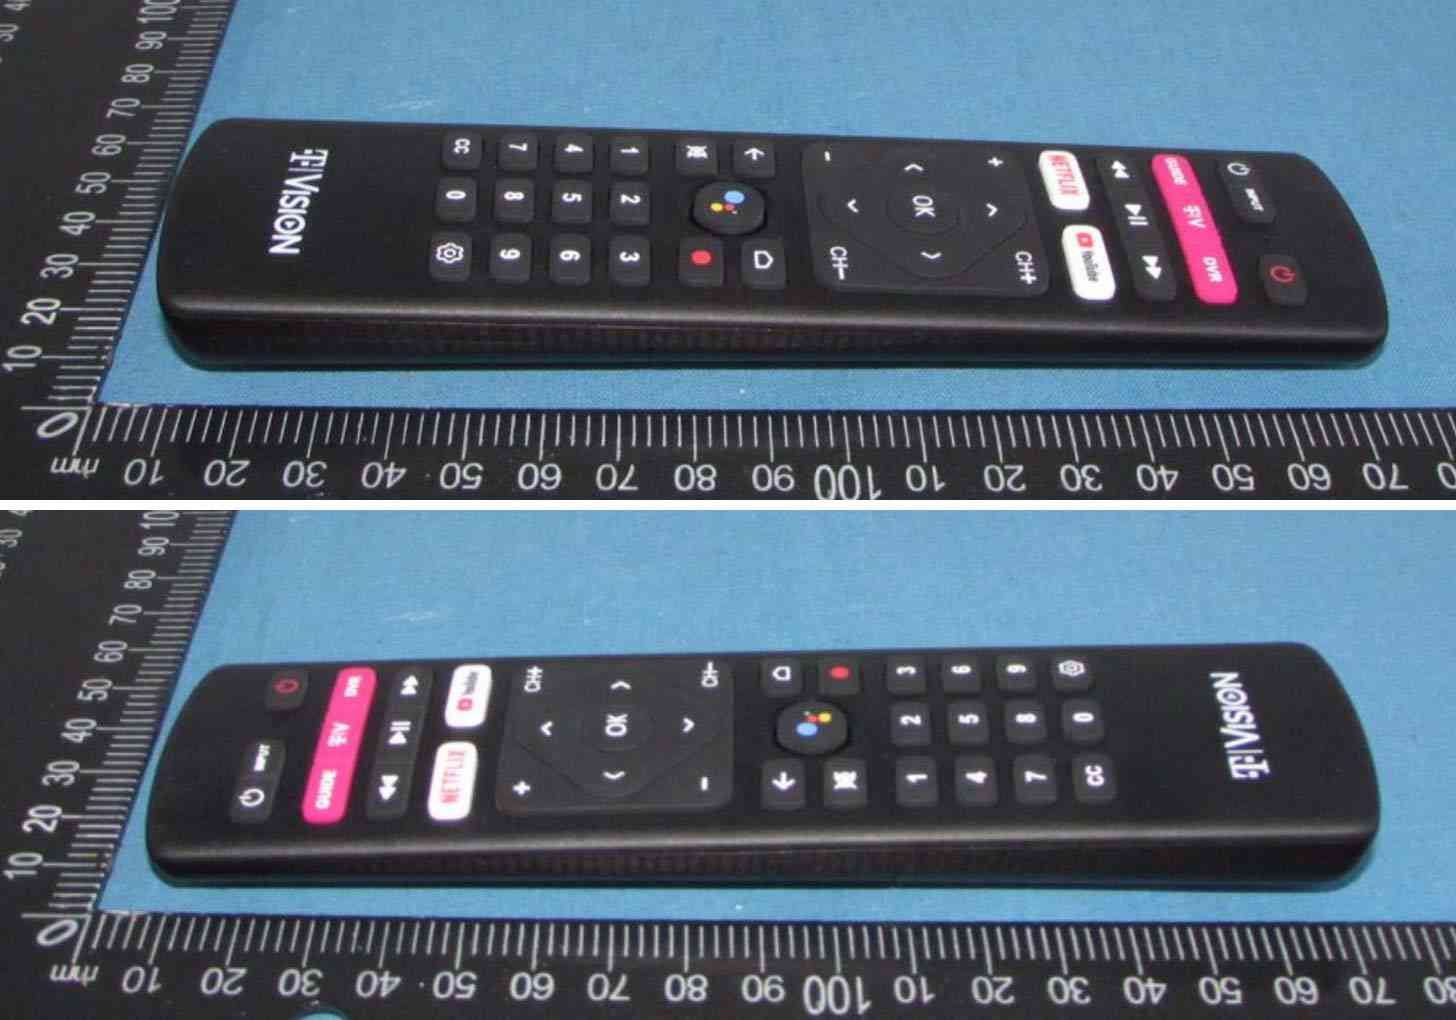 T-Mobile TVision Android TV remote sides